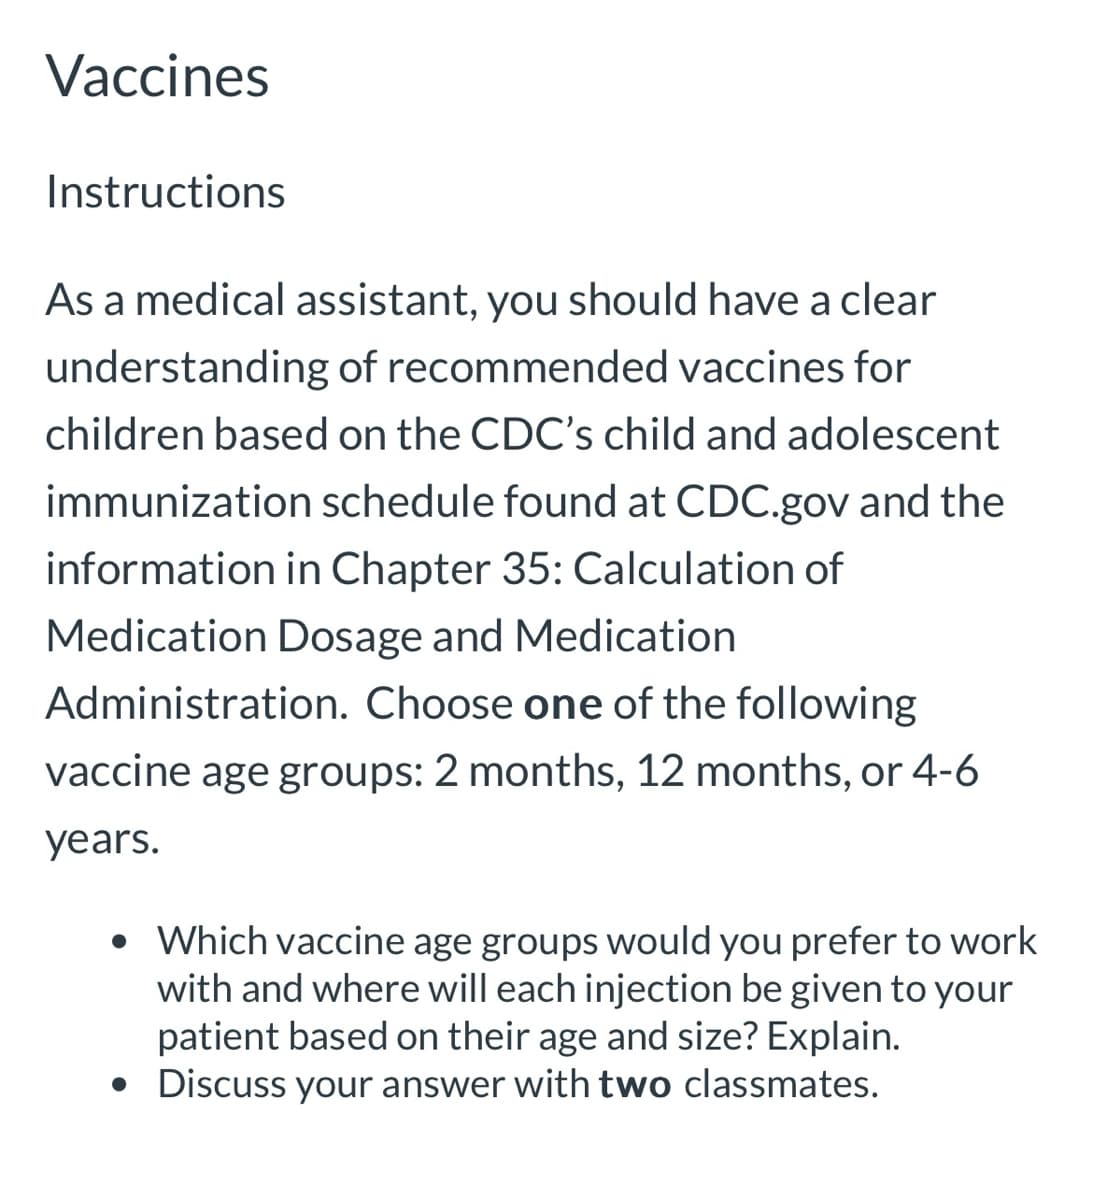 Vaccines
Instructions
As a medical assistant, you should have a clear
understanding of recommended vaccines for
children based on the CDC's child and adolescent
immunization schedule found at CDC.gov and the
information in Chapter 35: Calculation of
Medication Dosage and Medication
Administration. Choose one of the following
vaccine age groups: 2 months, 12 months, or 4-6
years.
• Which vaccine age groups would you prefer to work
with and where will each injection be given to your
patient based on their age and size? Explain.
• Discuss your answer with two classmates.